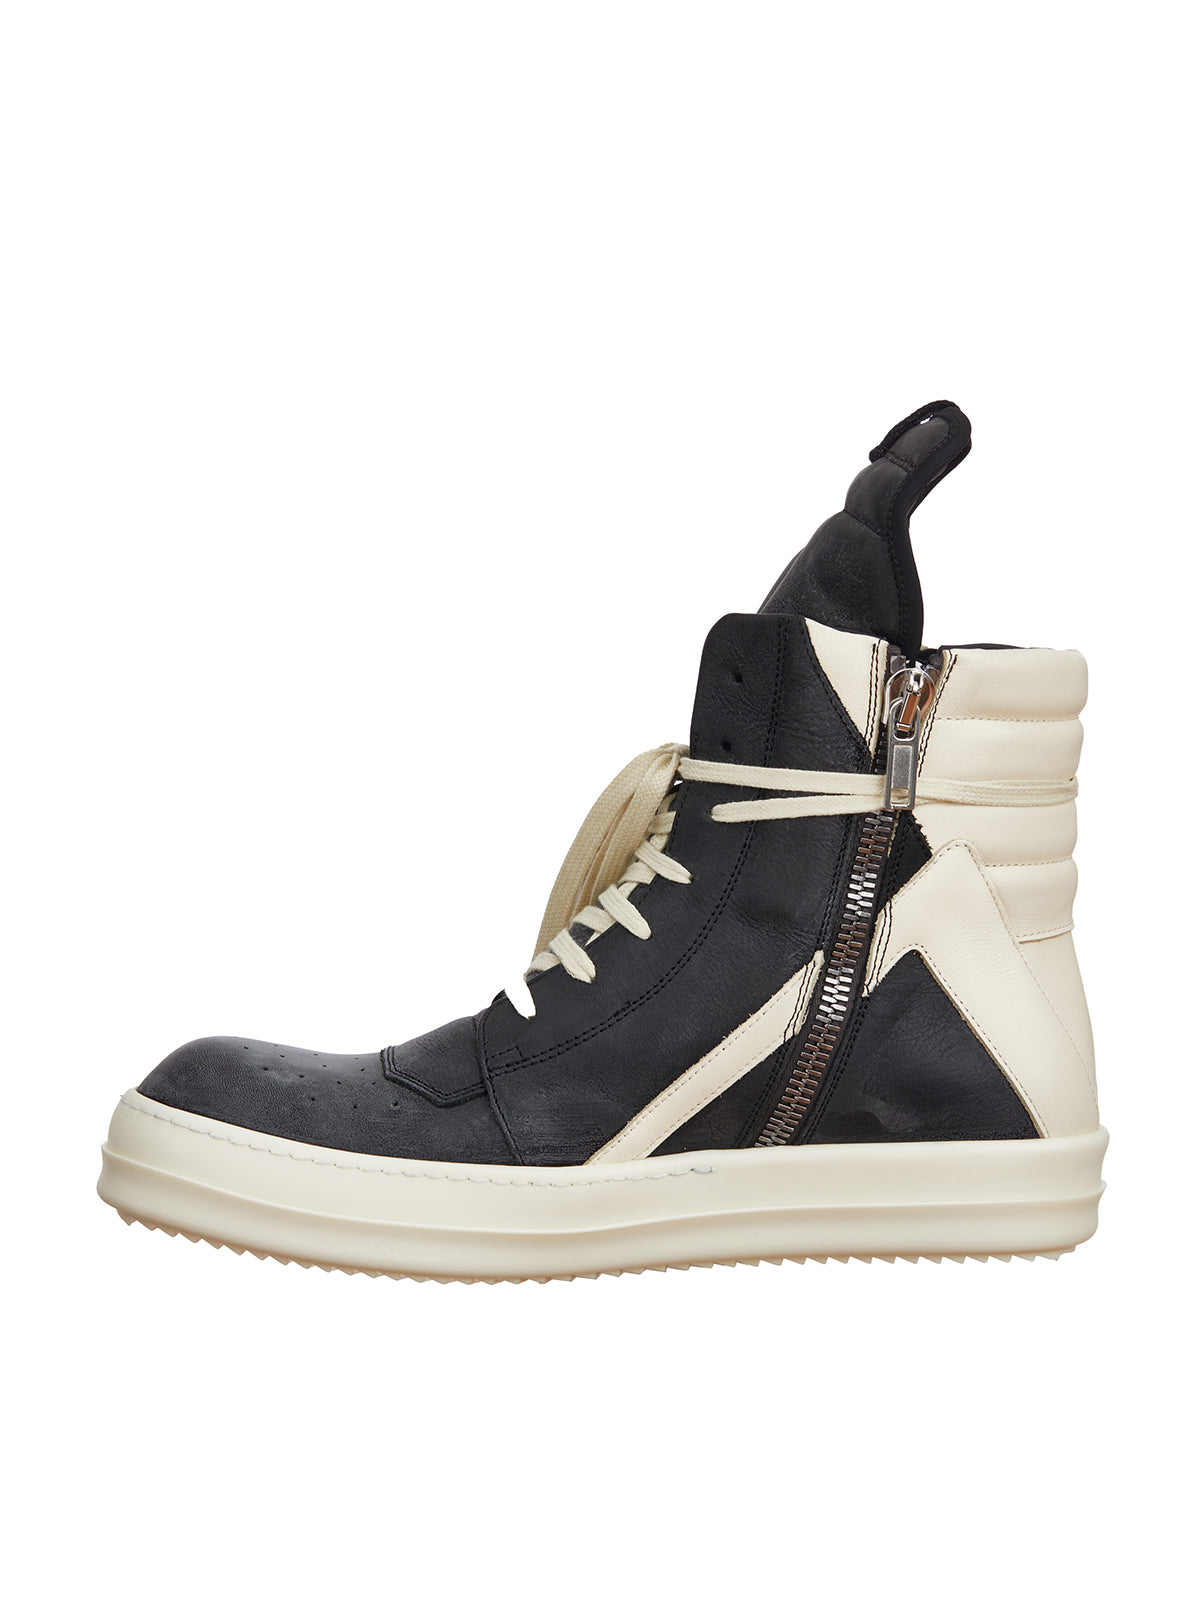 RICK OWENS Stylish Black Leather Geobasket Sneakers for Men